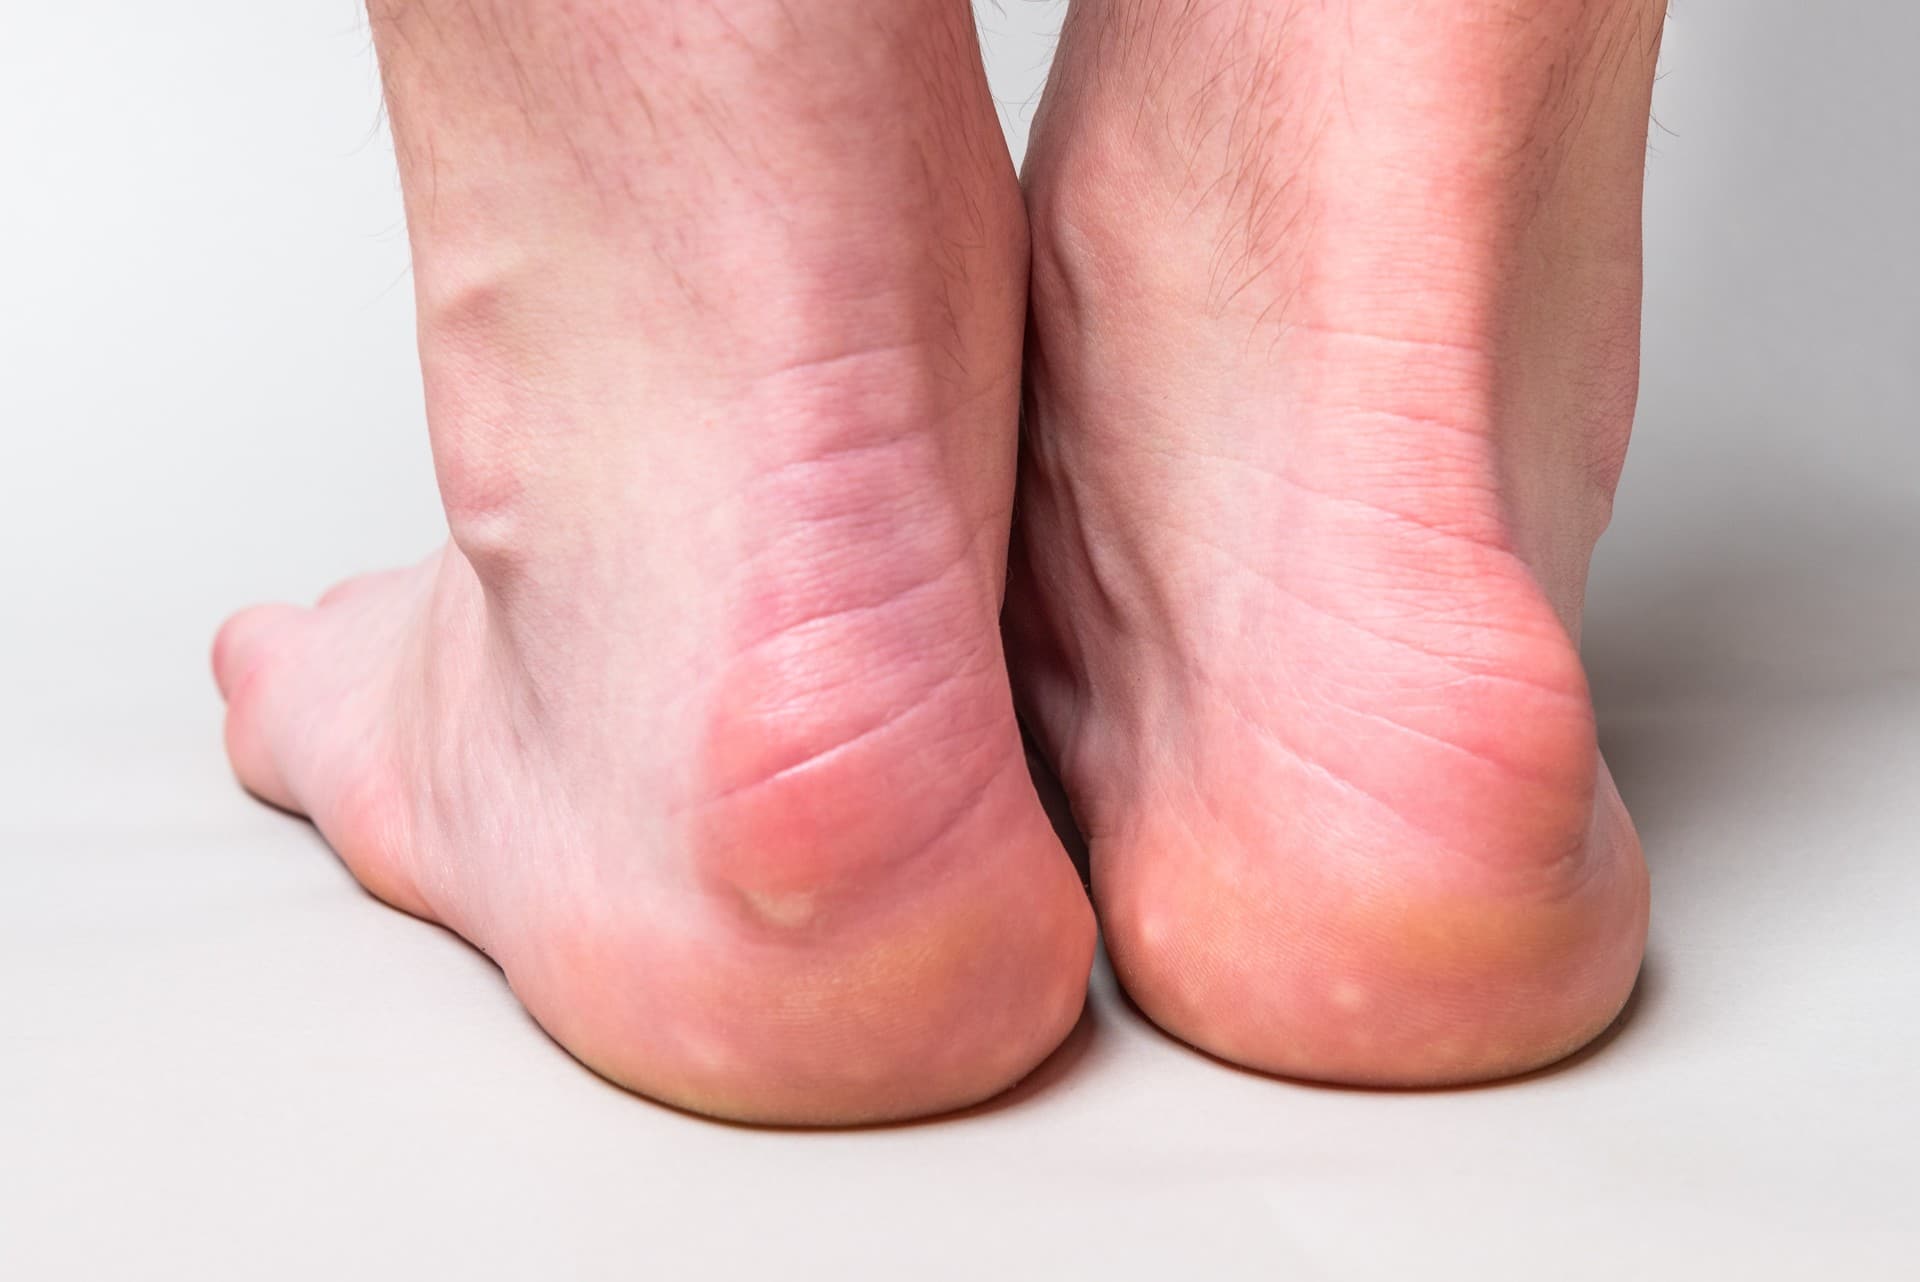 a photo of the back of someone's feet that has Haglund's Deformity